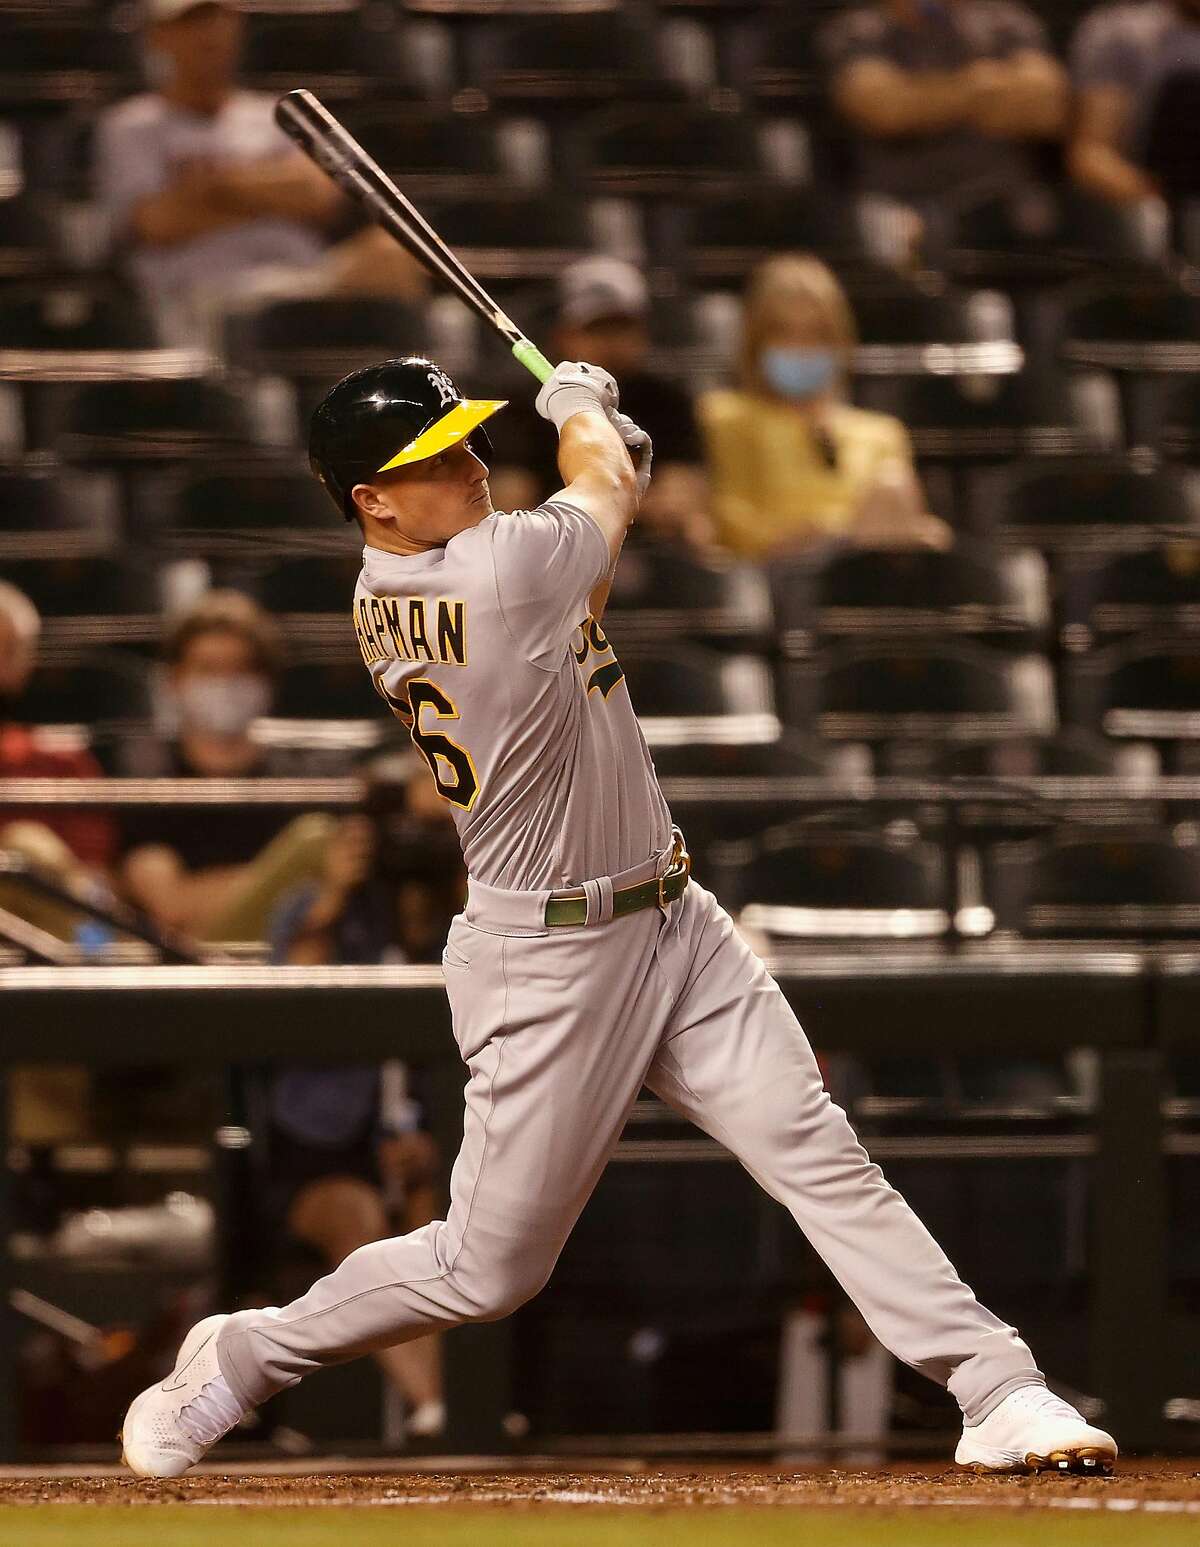 PHOENIX, ARIZONA - APRIL 12: Matt Chapman #26 of the Oakland Athletics hits a solo home run against the Arizona Diamondbacks during the fifth inning of the MLB game at Chase Field on April 12, 2021 in Phoenix, Arizona. (Photo by Christian Petersen/Getty Images)